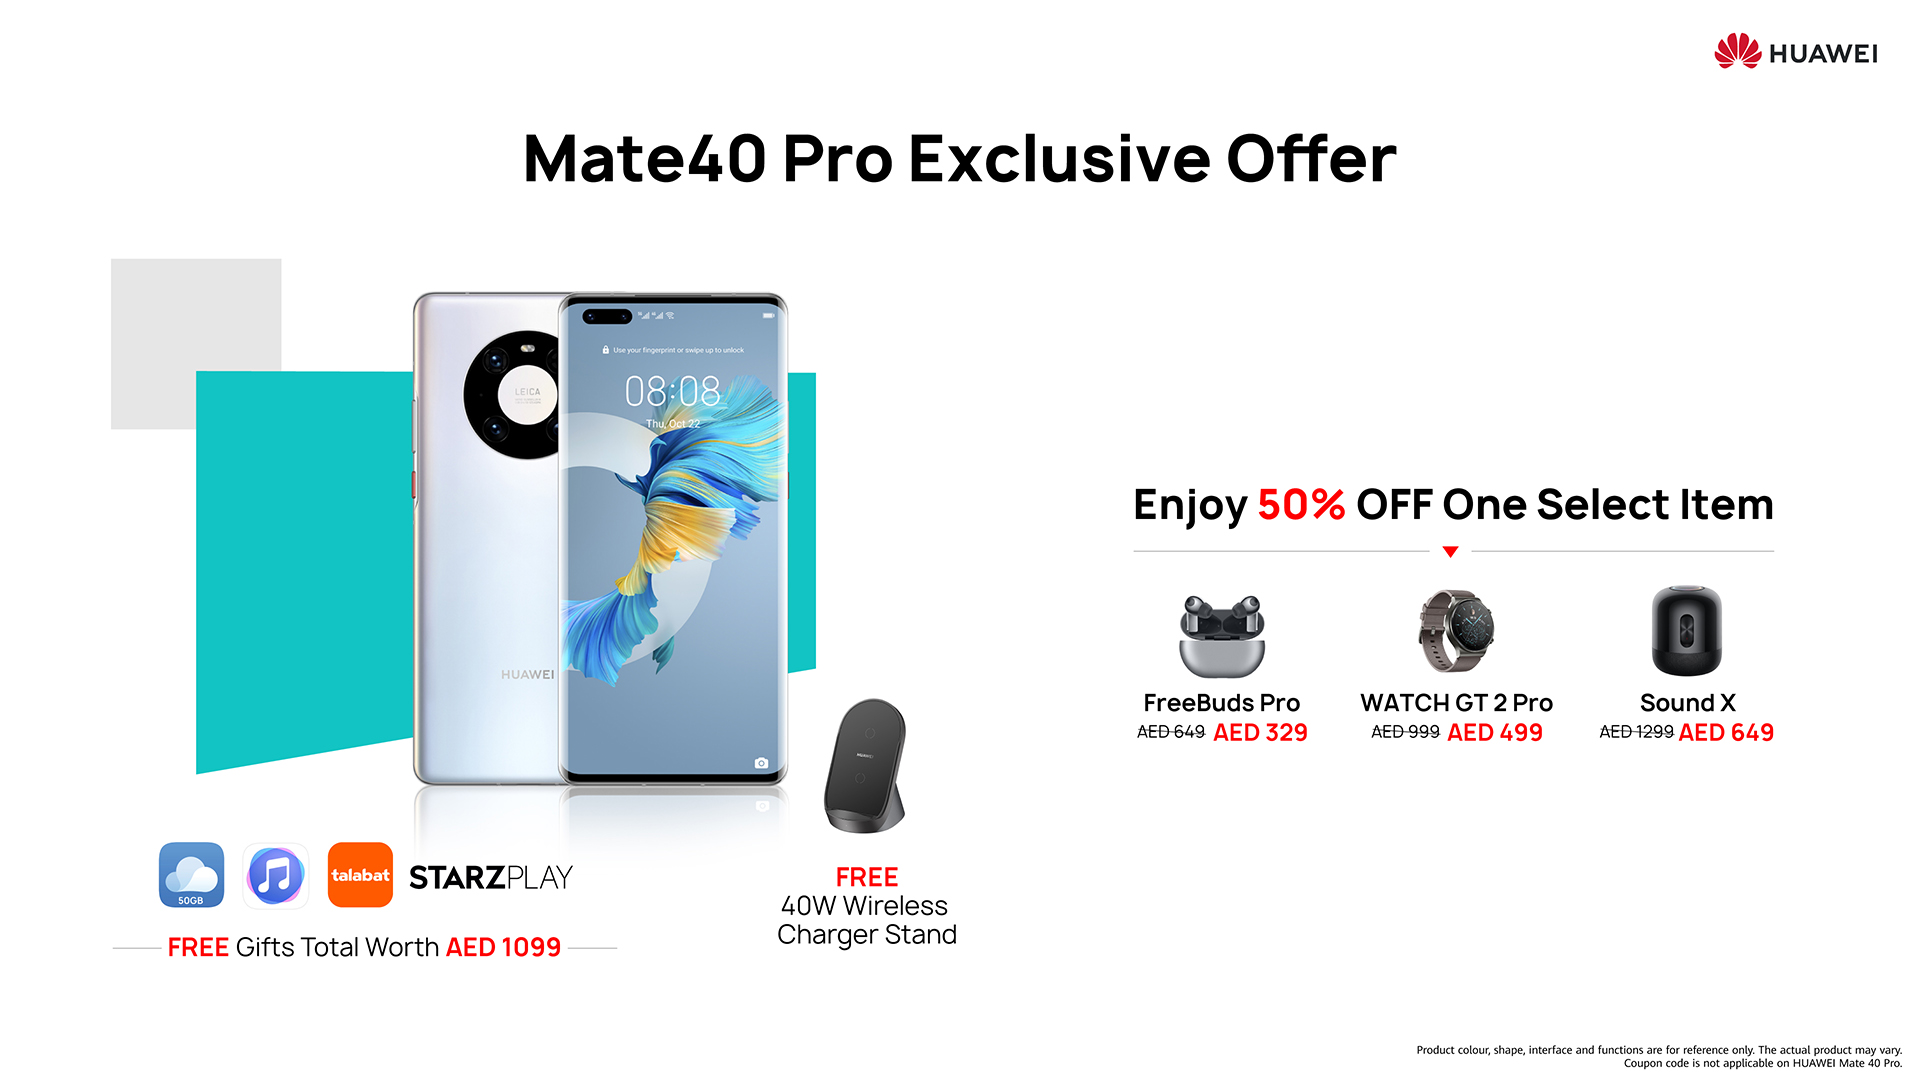 HUAWEI MEGA LIVE SALE Set To Announce Massive Offers Along With HUAWEI Mate 40 Pro Pre-Orders